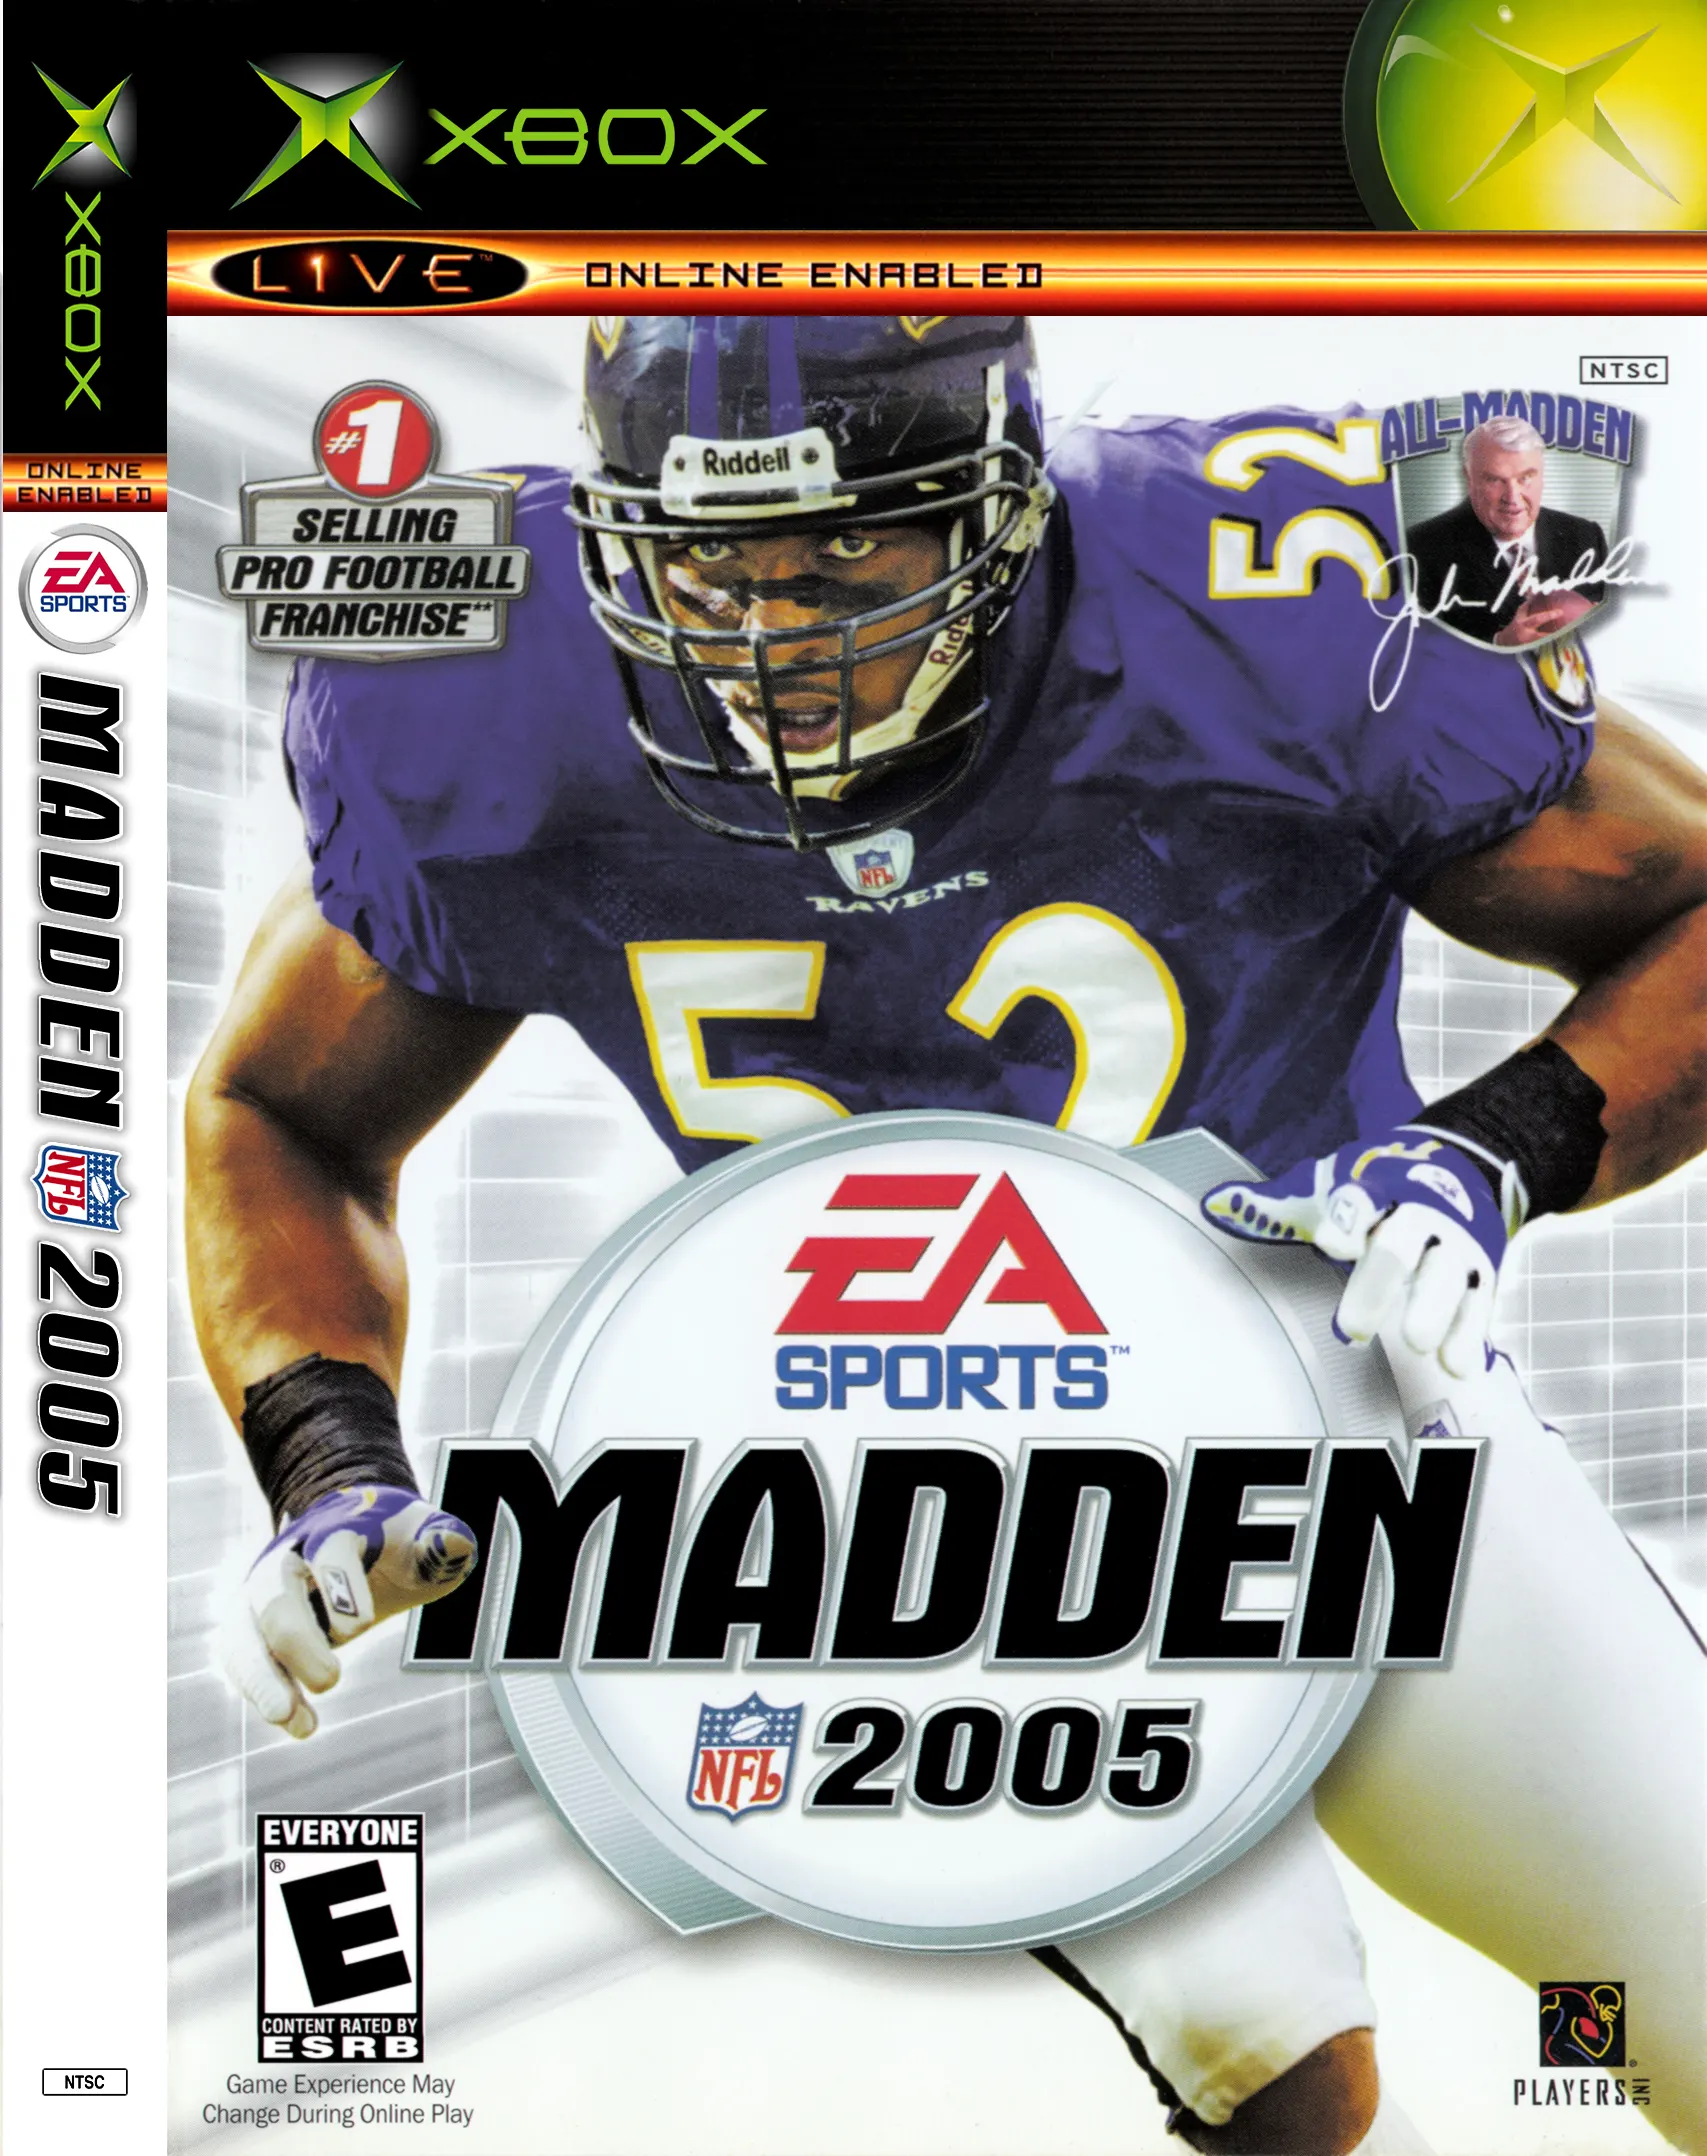 Original Xbox Game Console Madden NFL 2005 game box front.